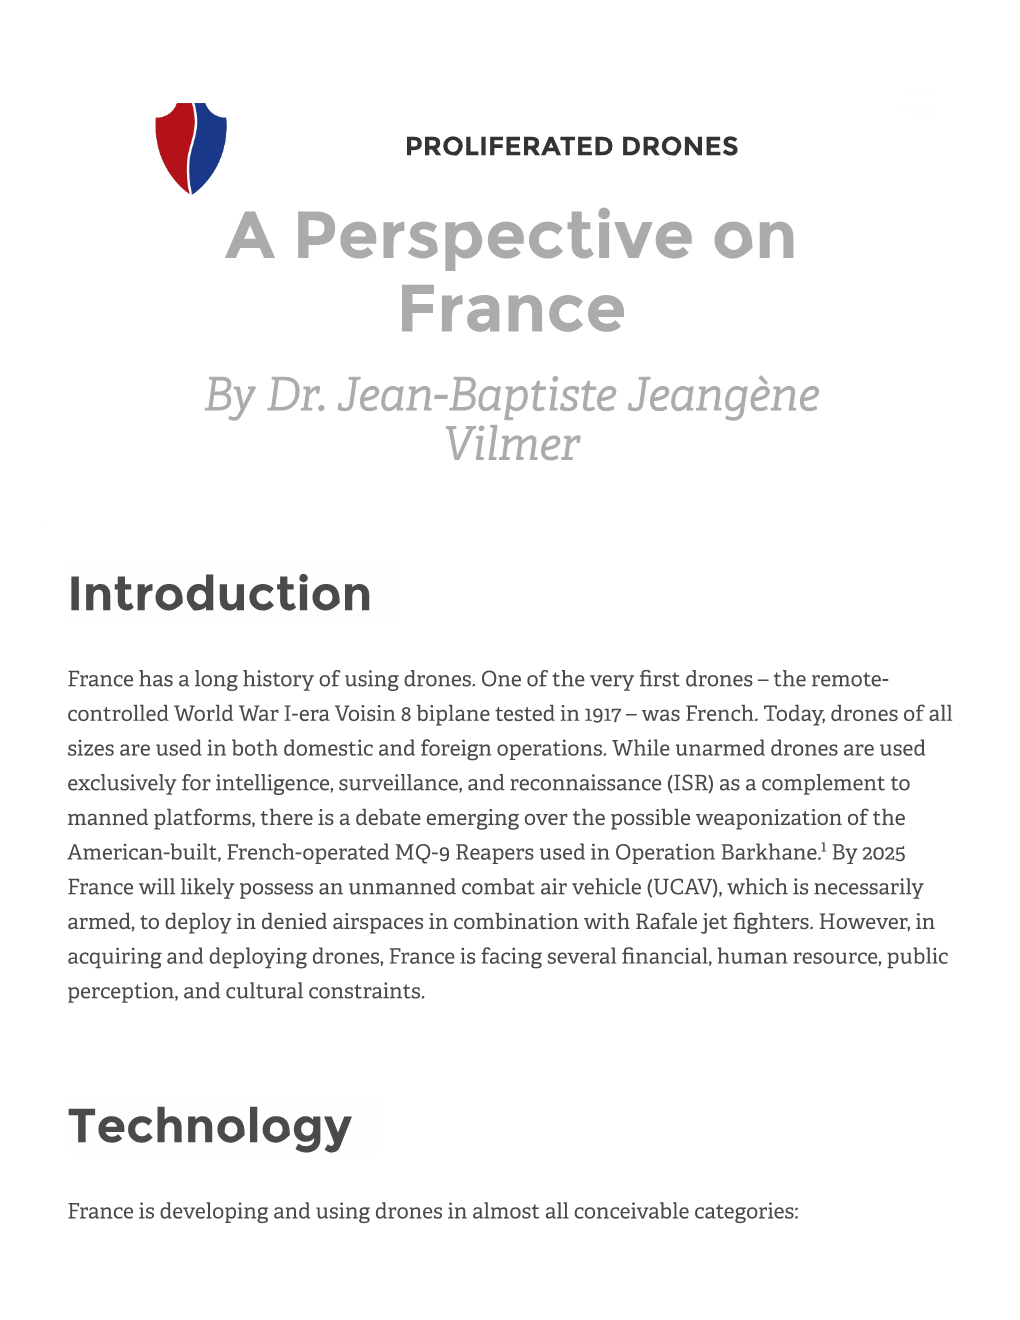 A Perspective on France by Dr